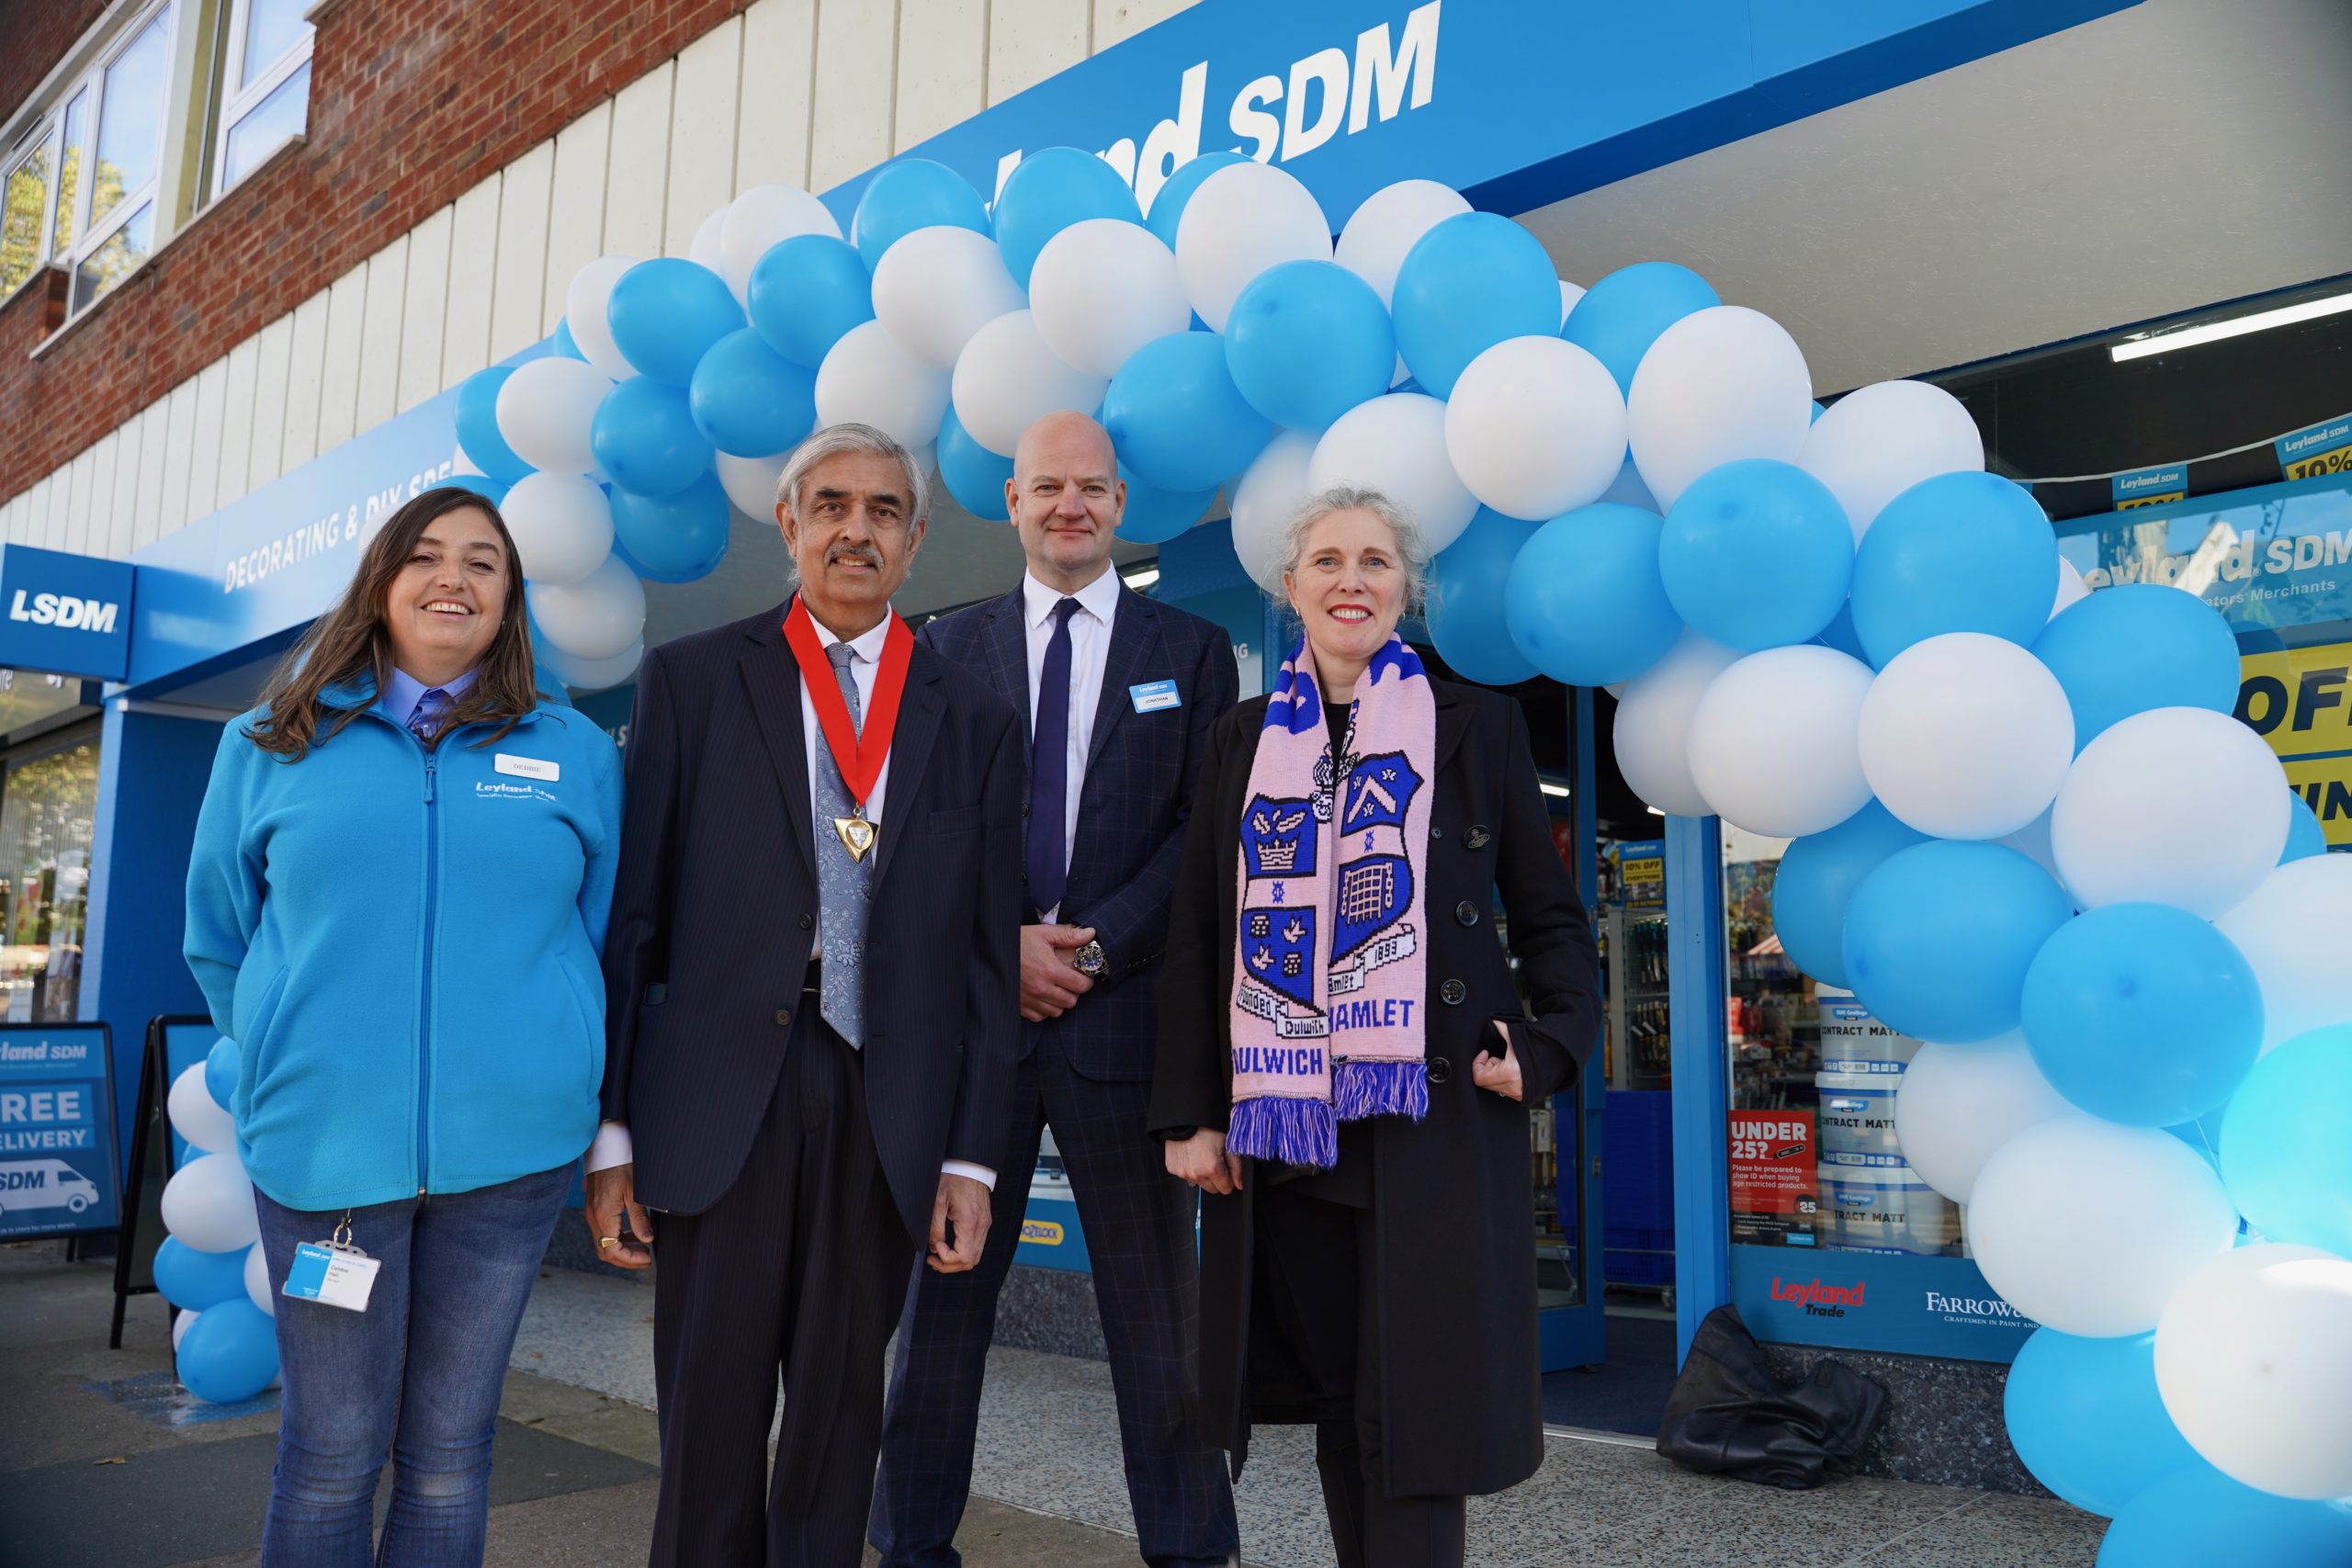 Dulwich Store Opening